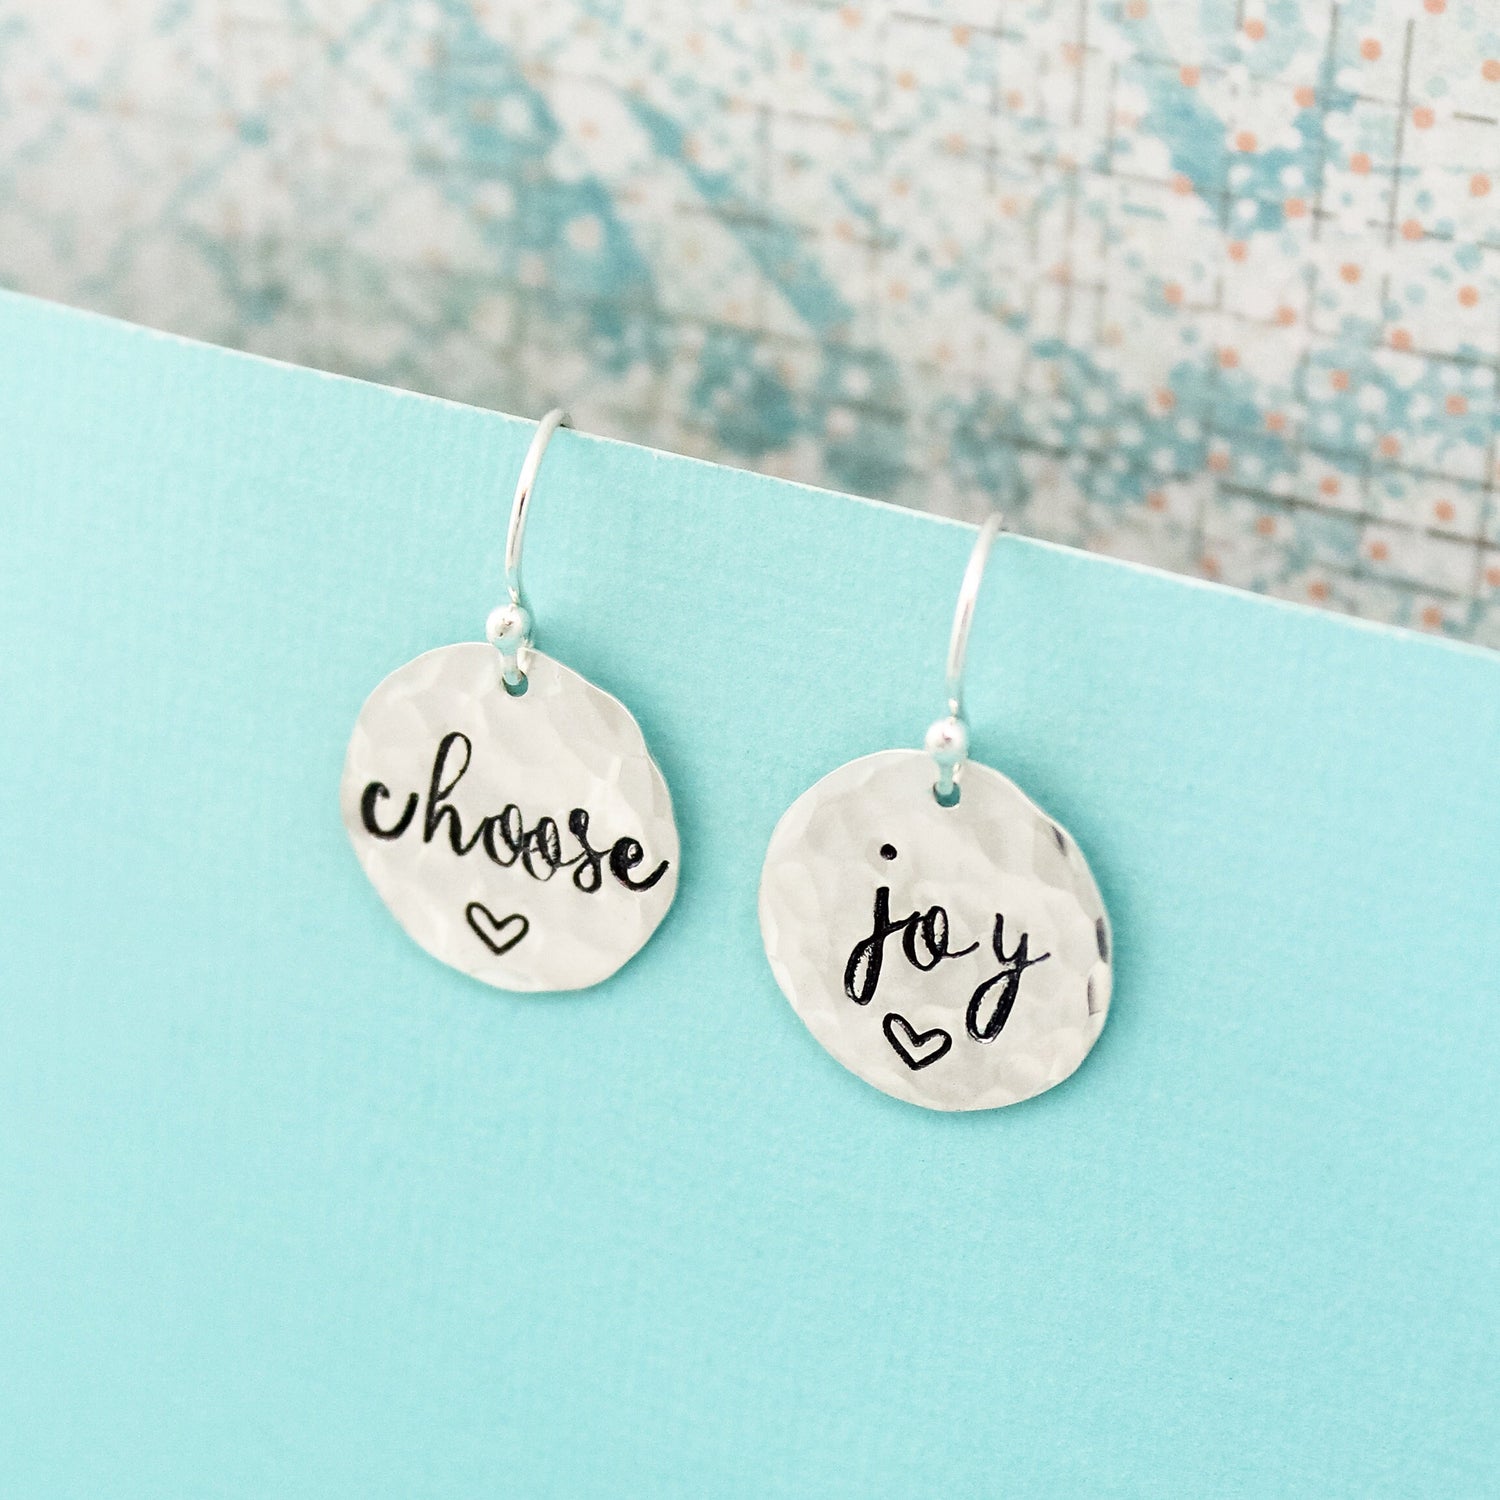 Choose Joy Earrings in Sterling Silver, Positive Inspirational Jewelry, Hand Stamped Earrings, Gifts for Her, Choose Joy Jewelry